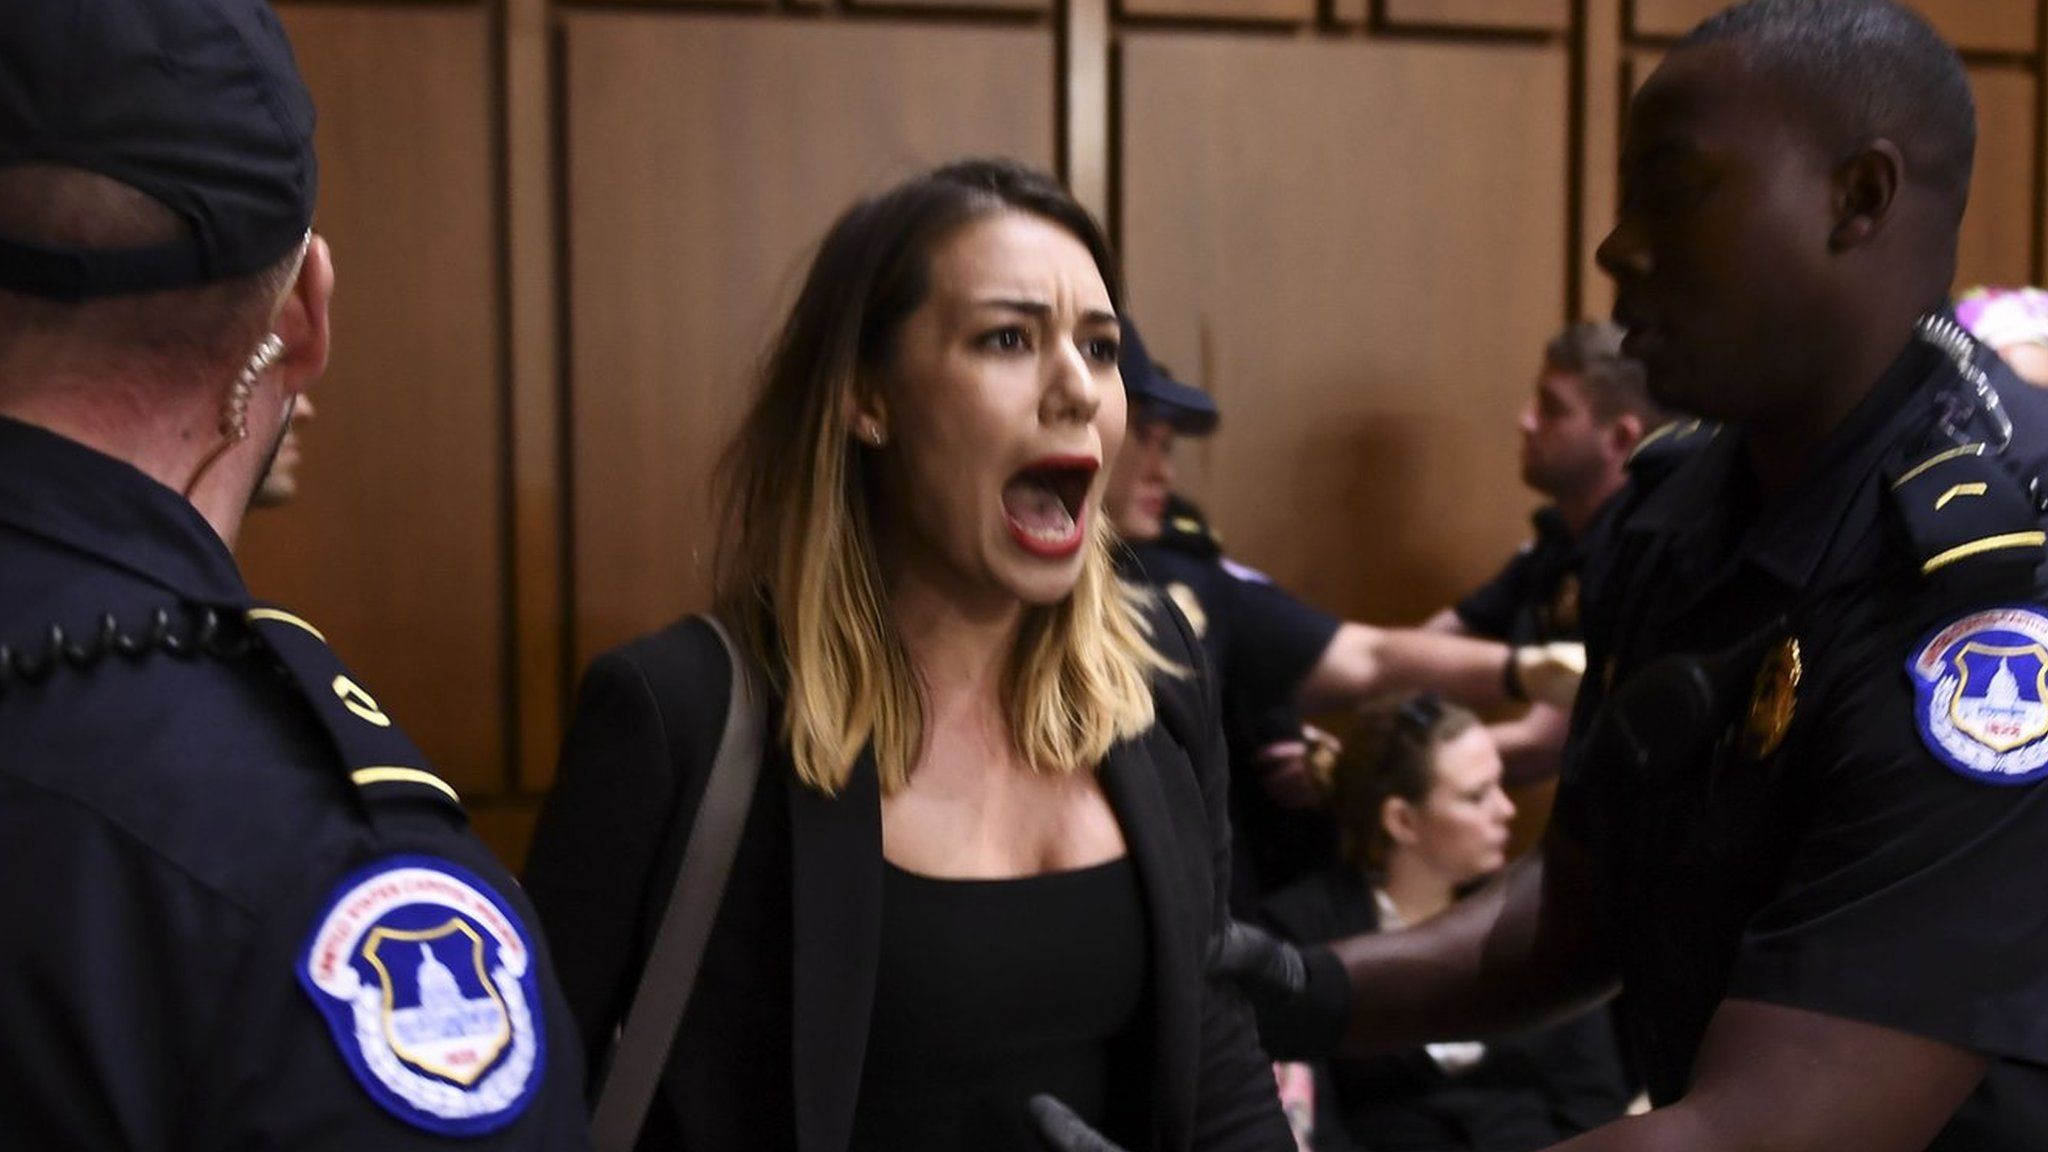 A woman protests as US Supreme Court nominee Brett Kavanaugh arrives on the first day of his confirmation hearing